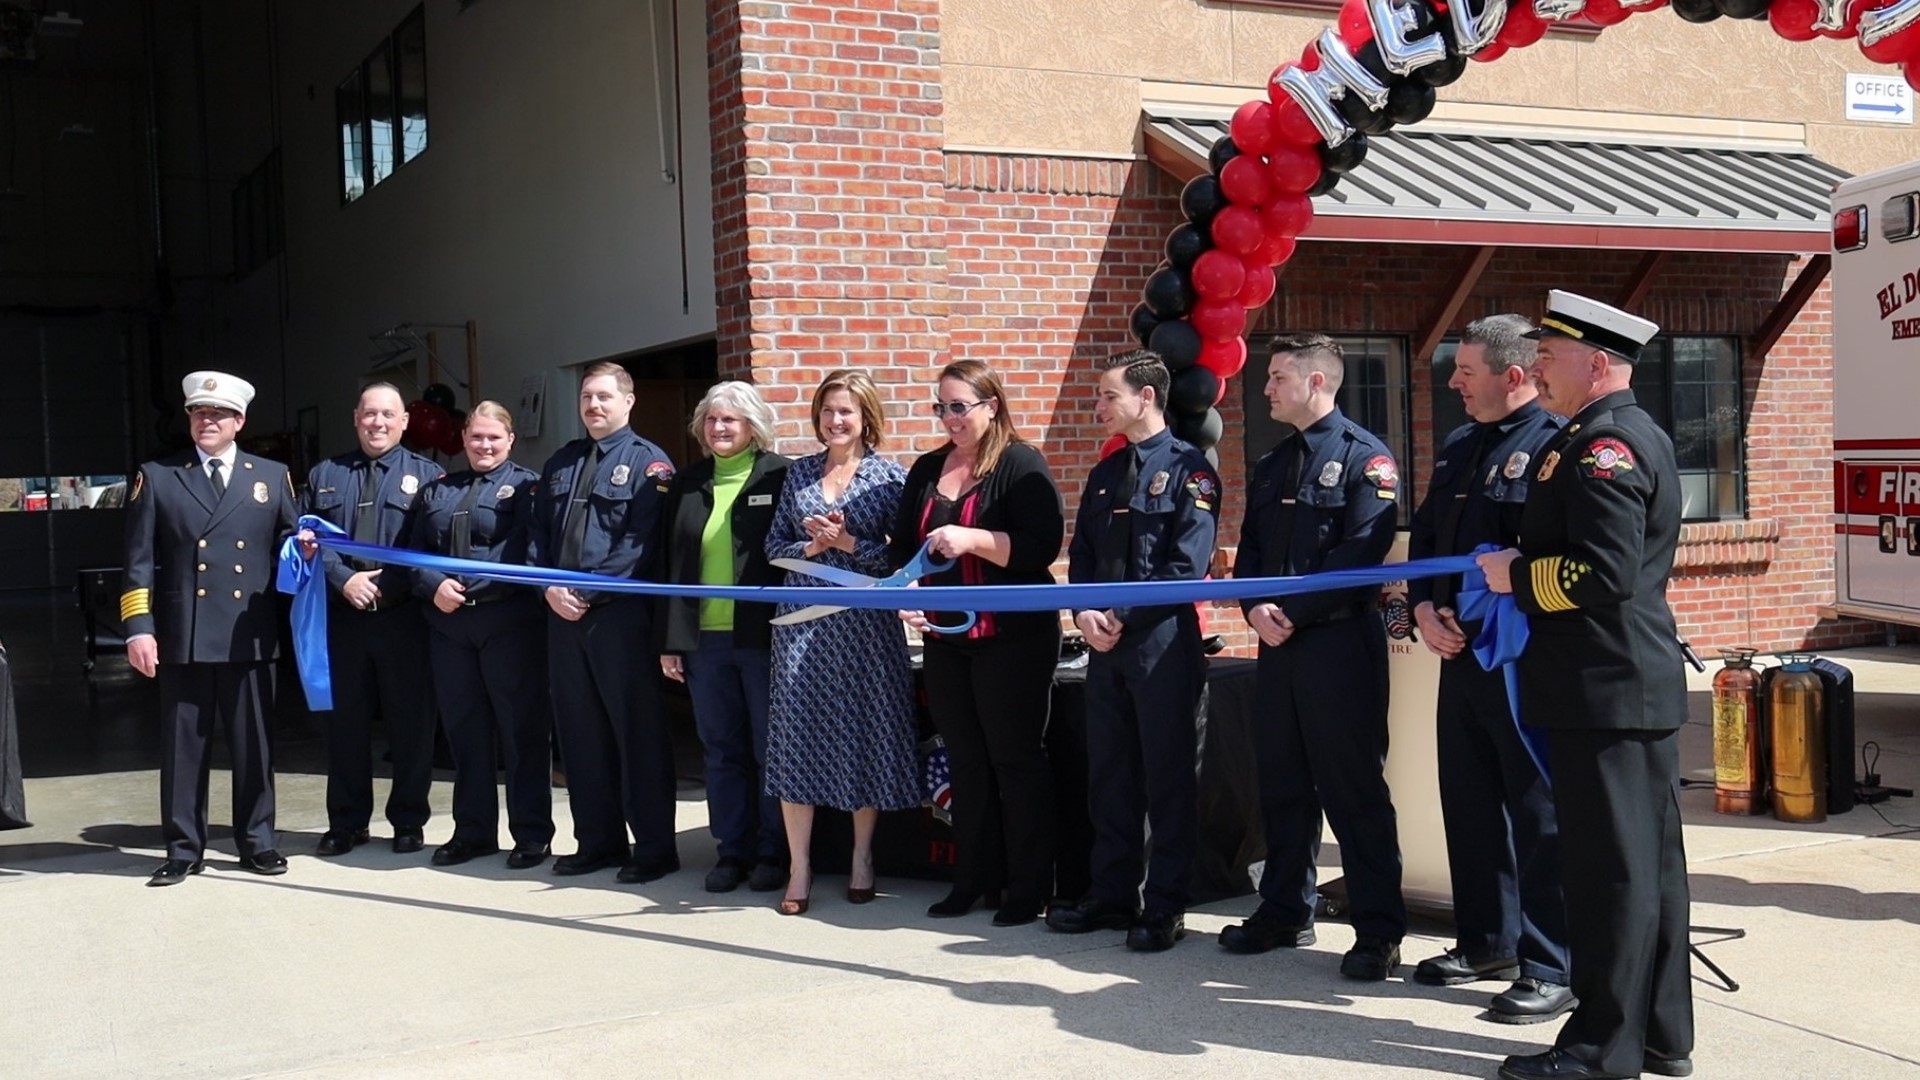 Medic 49 started taking calls for service March 15, but a ribbon cutting ceremony was held Saturday to "recognize the ambulance’s grand reopening."